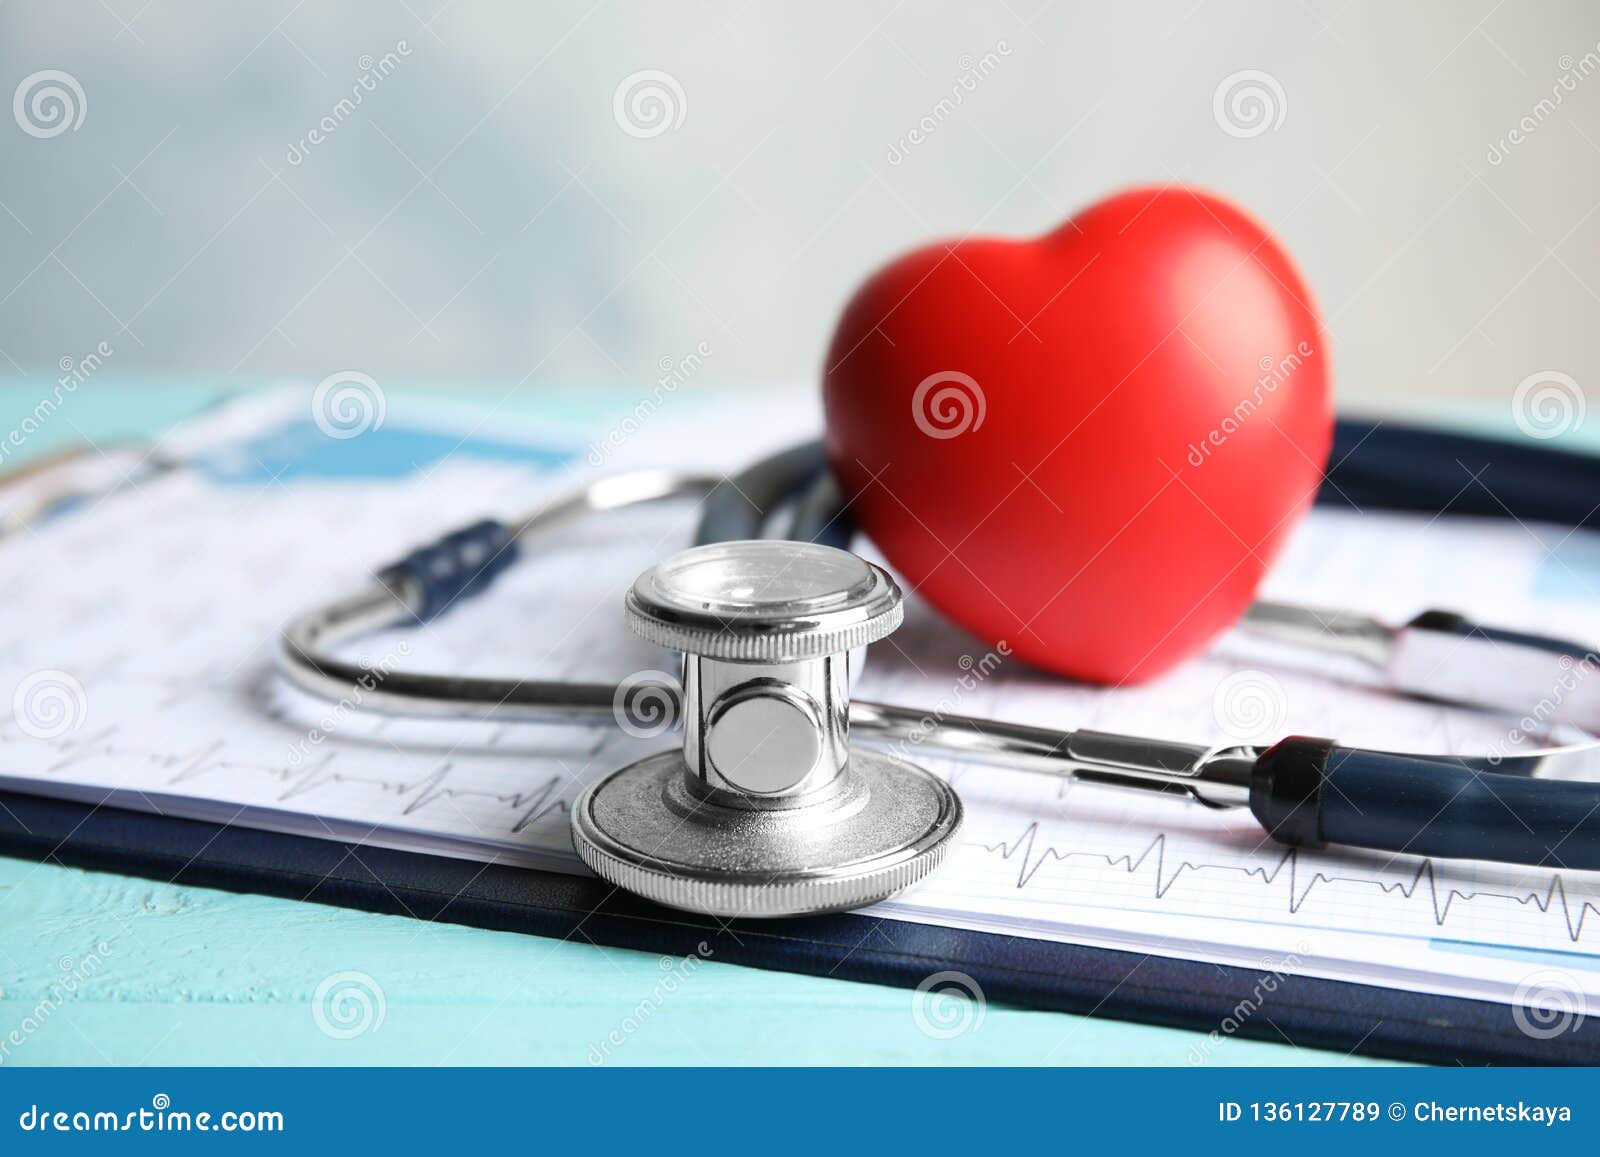 stethoscope, red heart and cardiogram on table. cardiology